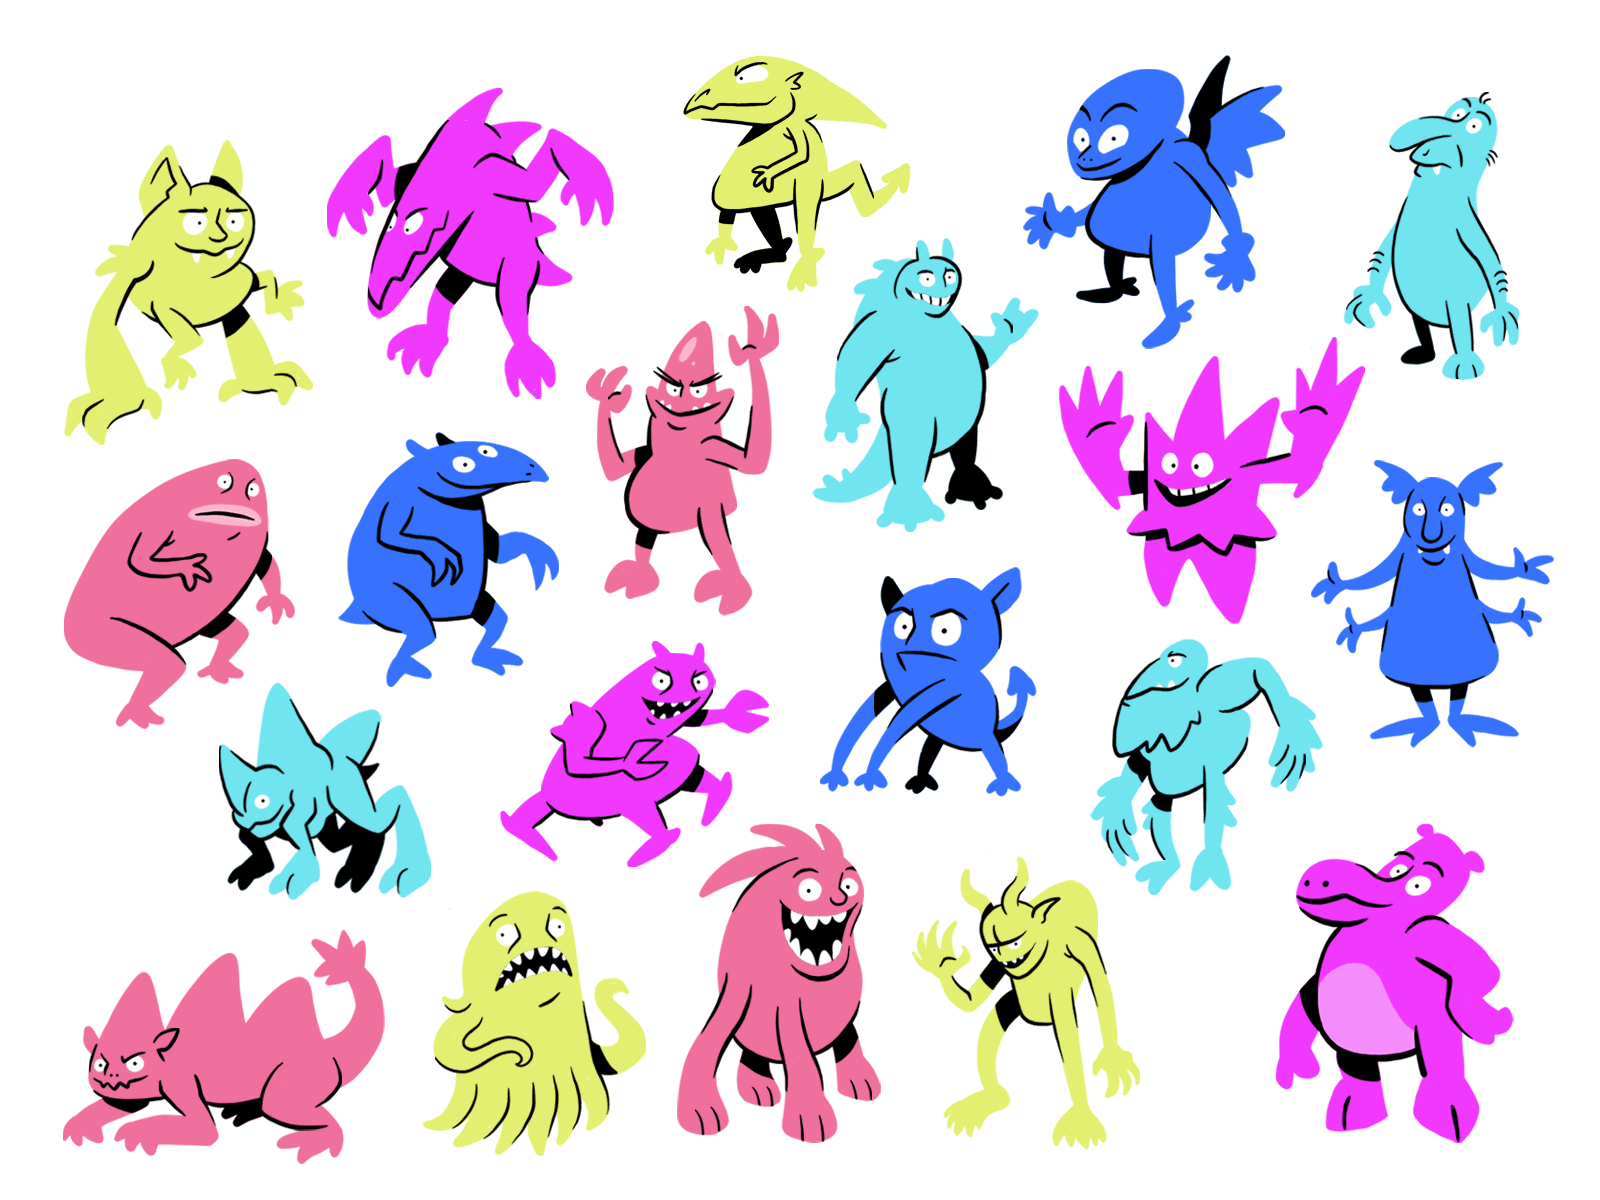 The Experi-Men: Set 4 animated animated gif boston character animation character design concept art concept design creature design drawing drawing challenge gif illustration monster monsters neon neon colors originalcharater procreate silhouette